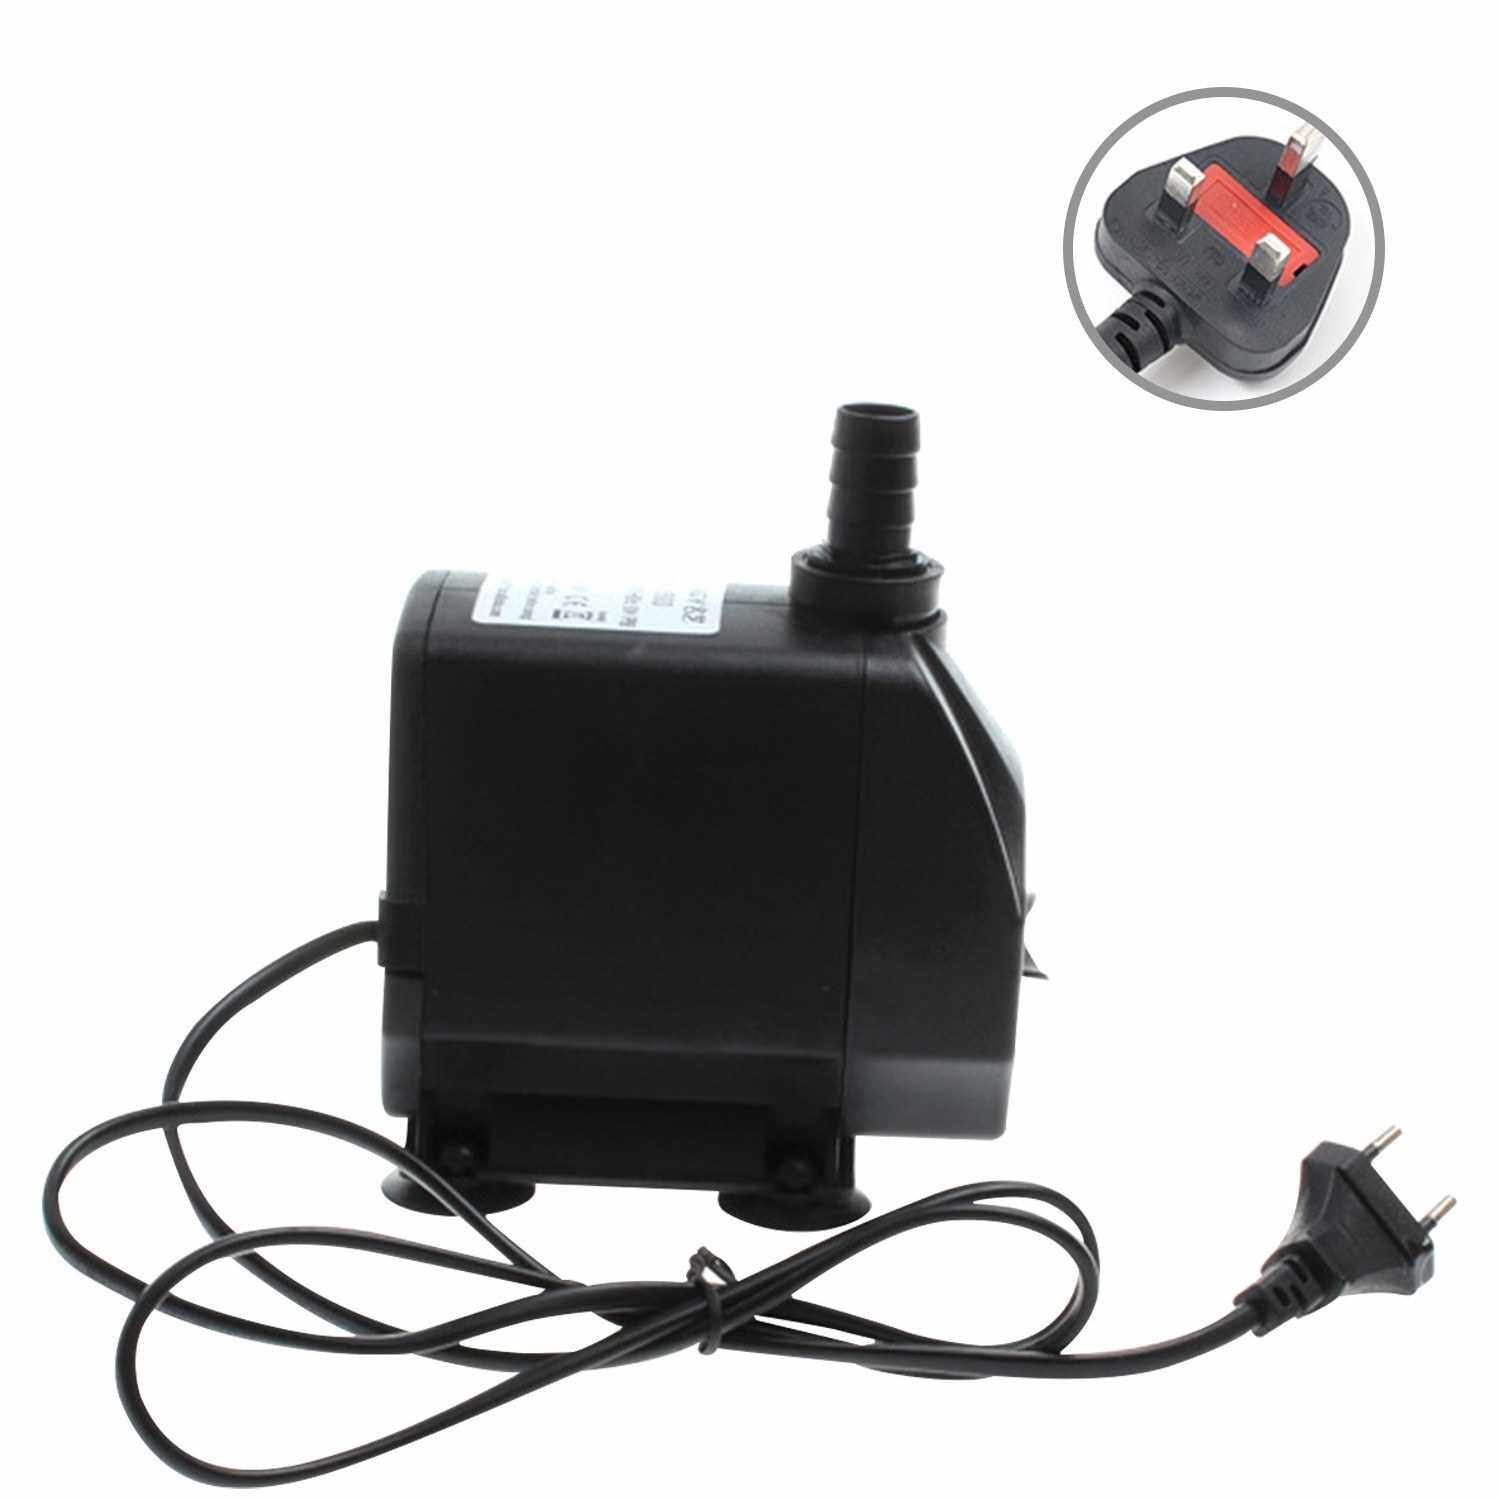 Water Pump Aquariums Ponds Fountains Hydropnic System Economical Small Quiet New